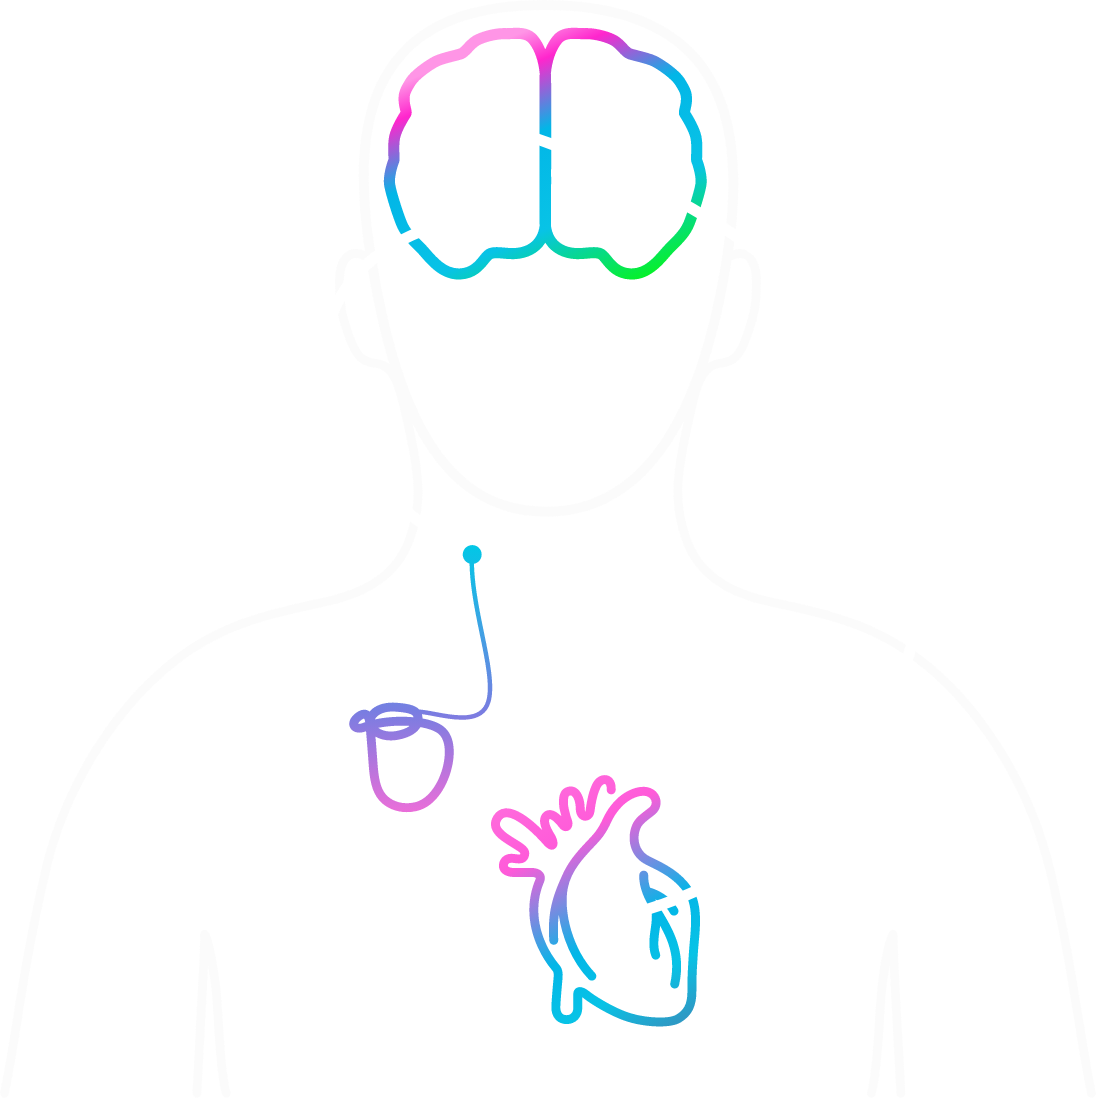 illustration of barostim's baroreflex activation therapy device connecting to the heart and to the brain